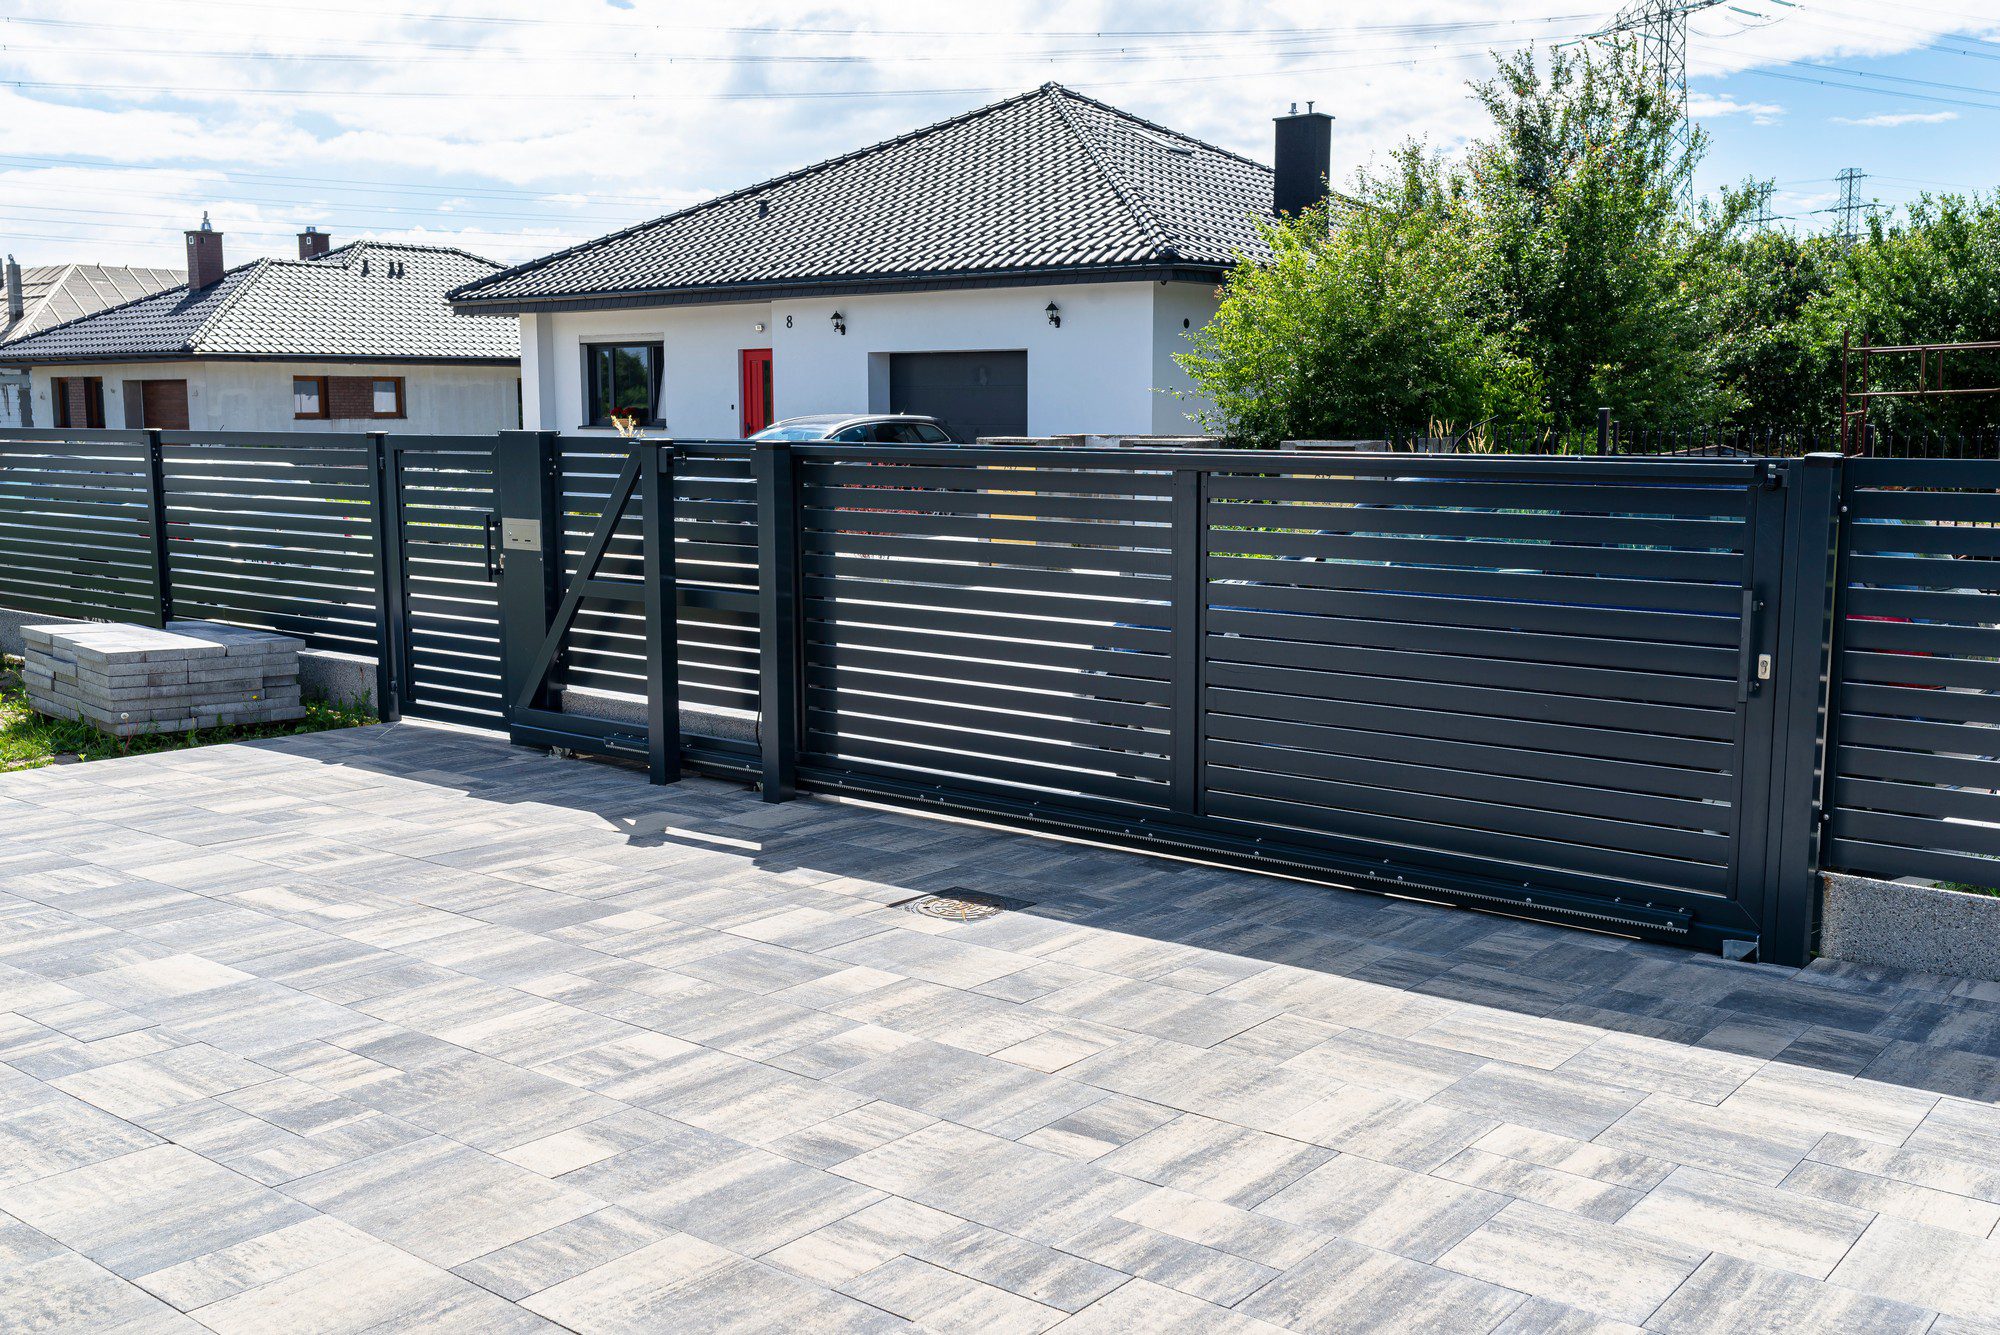 The image shows a modern residential outdoor setting with a horizontal slat fence and gate made of dark materials, likely metal. The fence provides privacy and security for the property. In front of the fence is a neatly installed paved area featuring large, rectangular stone tiles laid in a pattern. This paving creates a clean and attractive driveway or patio area. In the background, there are single-story houses with black tiled roofs. The houses have a contemporary design, with visible white exteriors and one with a red entrance door. Additionally, there is a well-kept green hedge behind the fence, adding a touch of natural beauty to the scene. The sky is blue and scattered with clouds, indicating fair weather. Overall, it shows a tidy and well-maintained suburban residential setting.